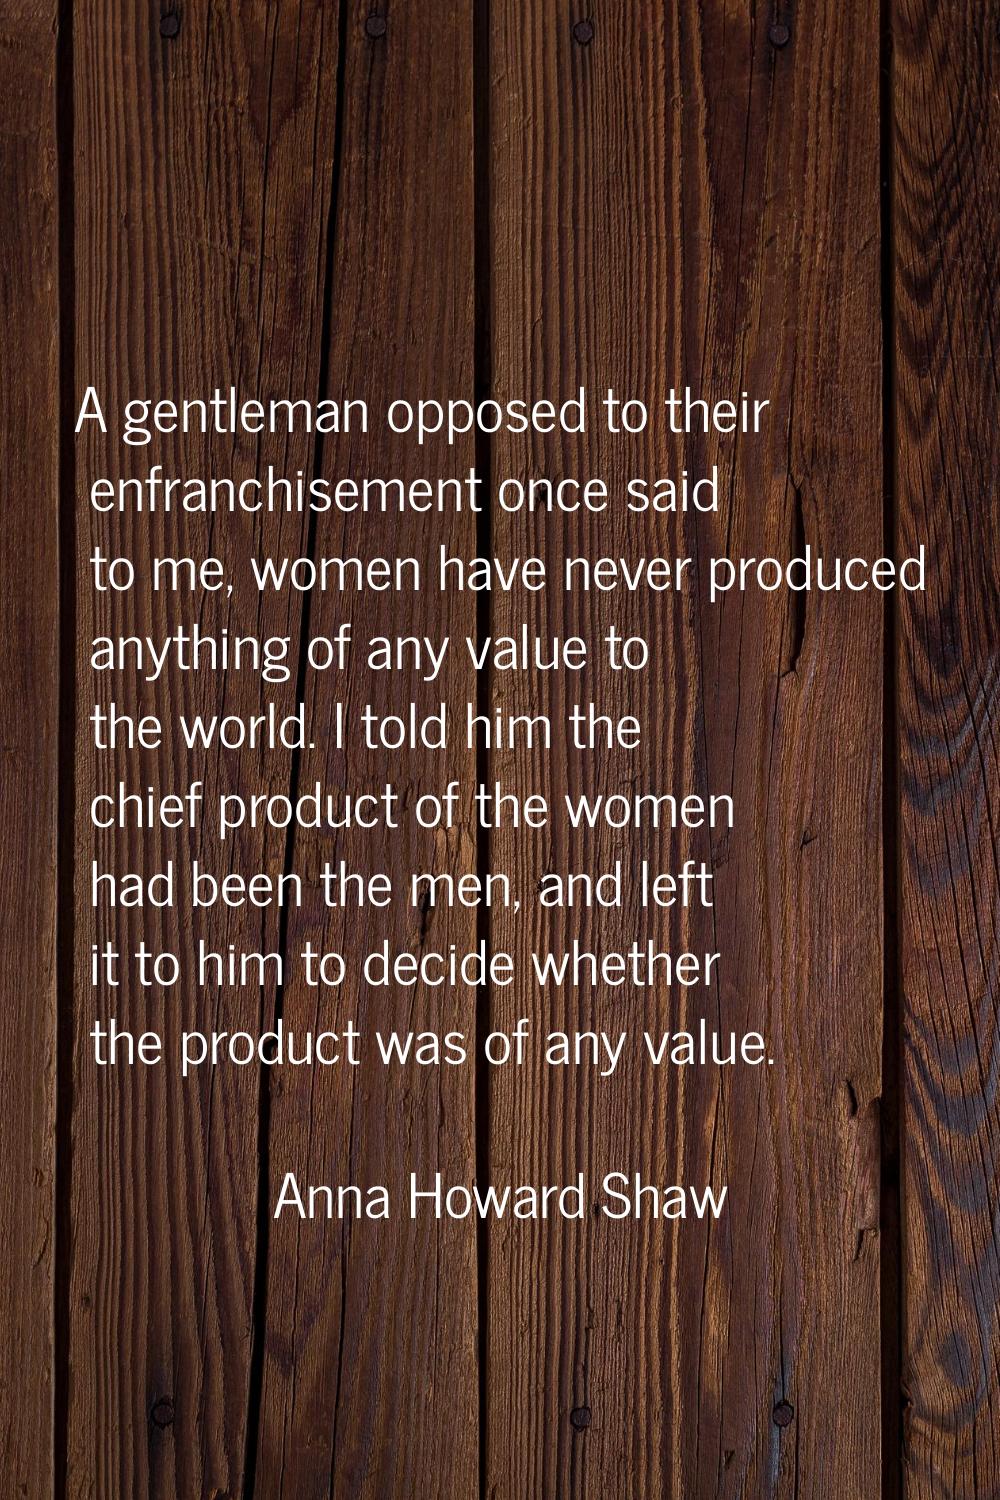 A gentleman opposed to their enfranchisement once said to me, women have never produced anything of